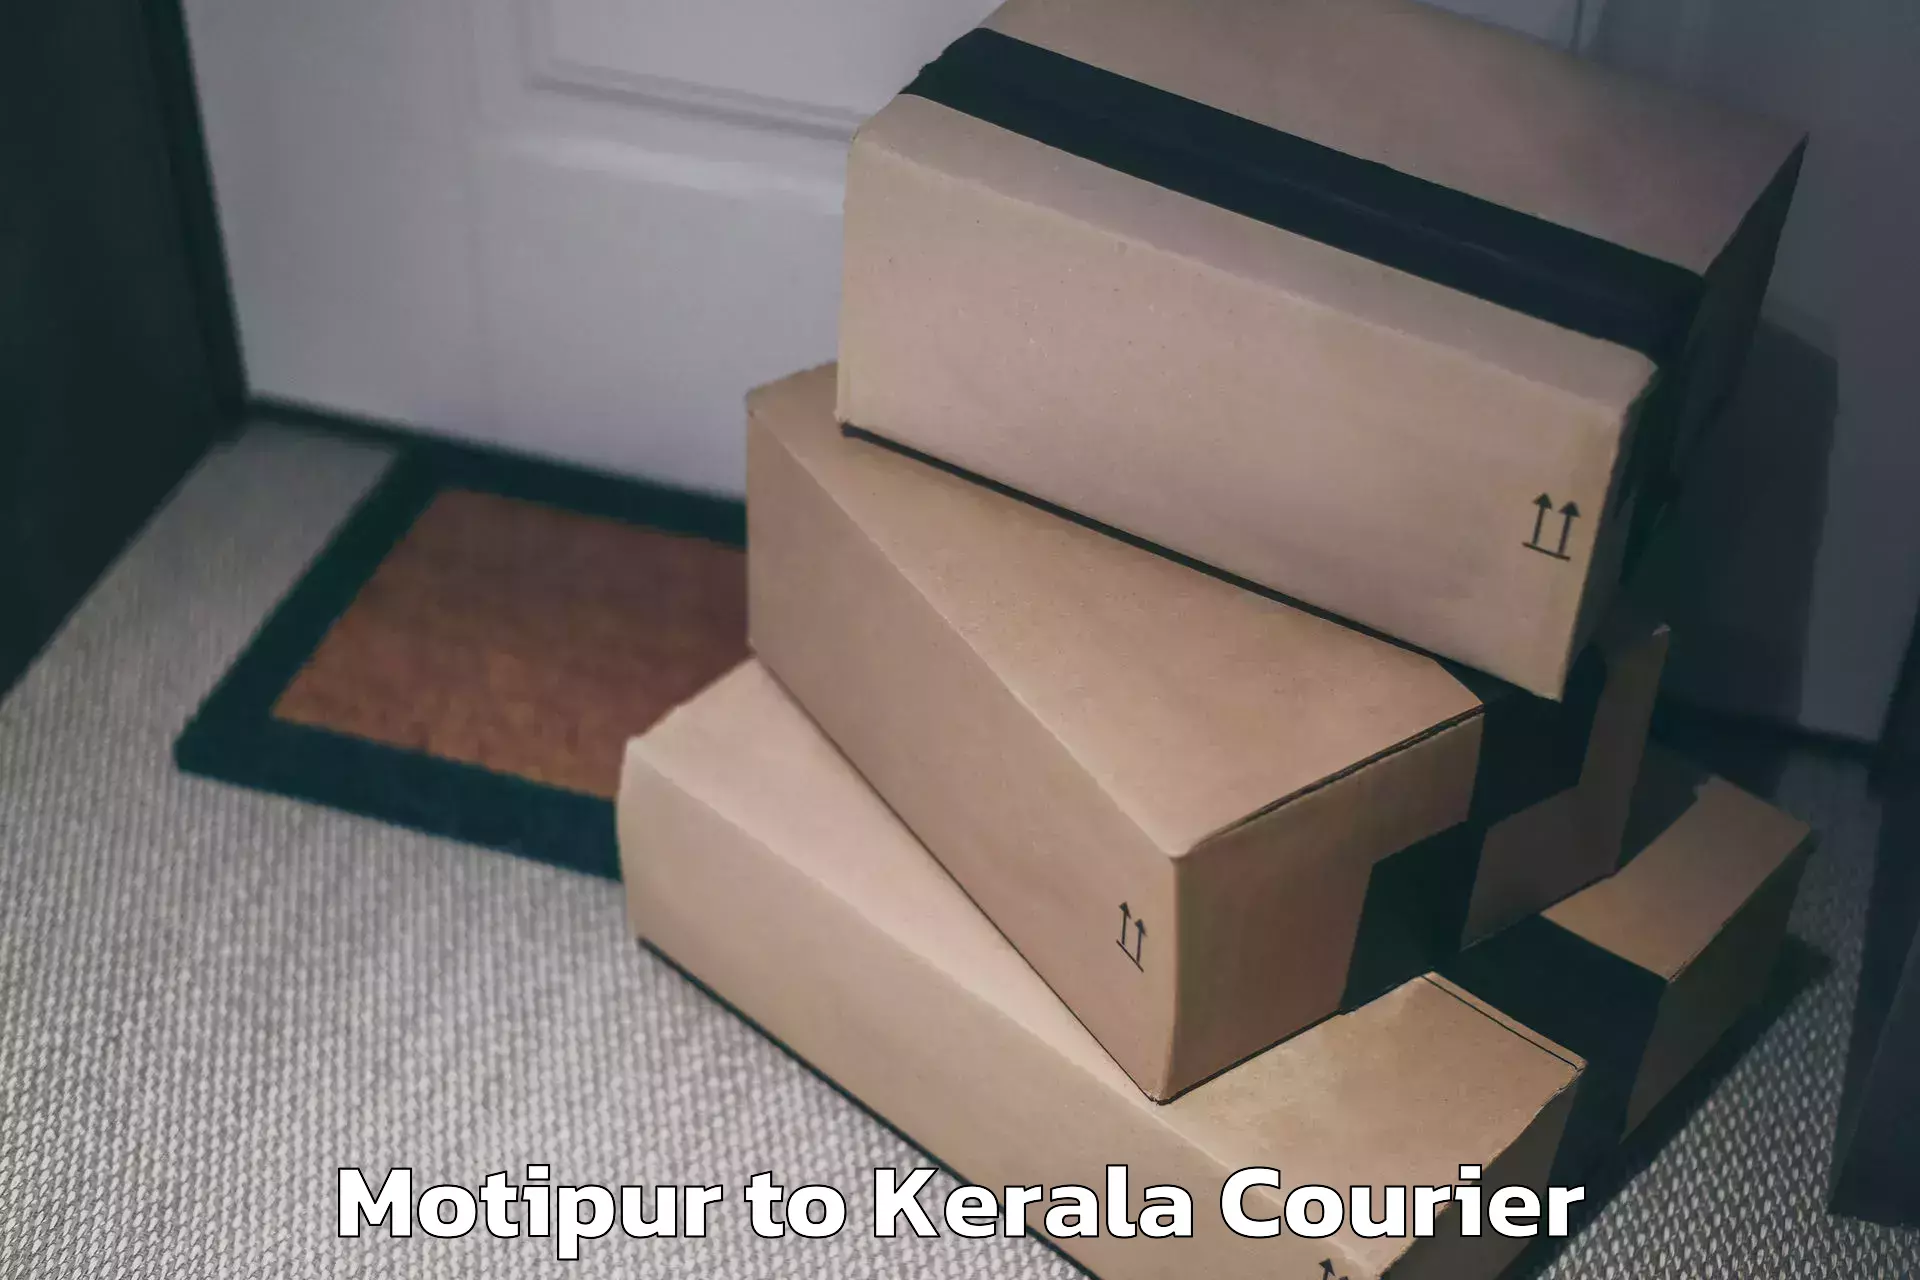 Luggage shipment specialists Motipur to Kerala